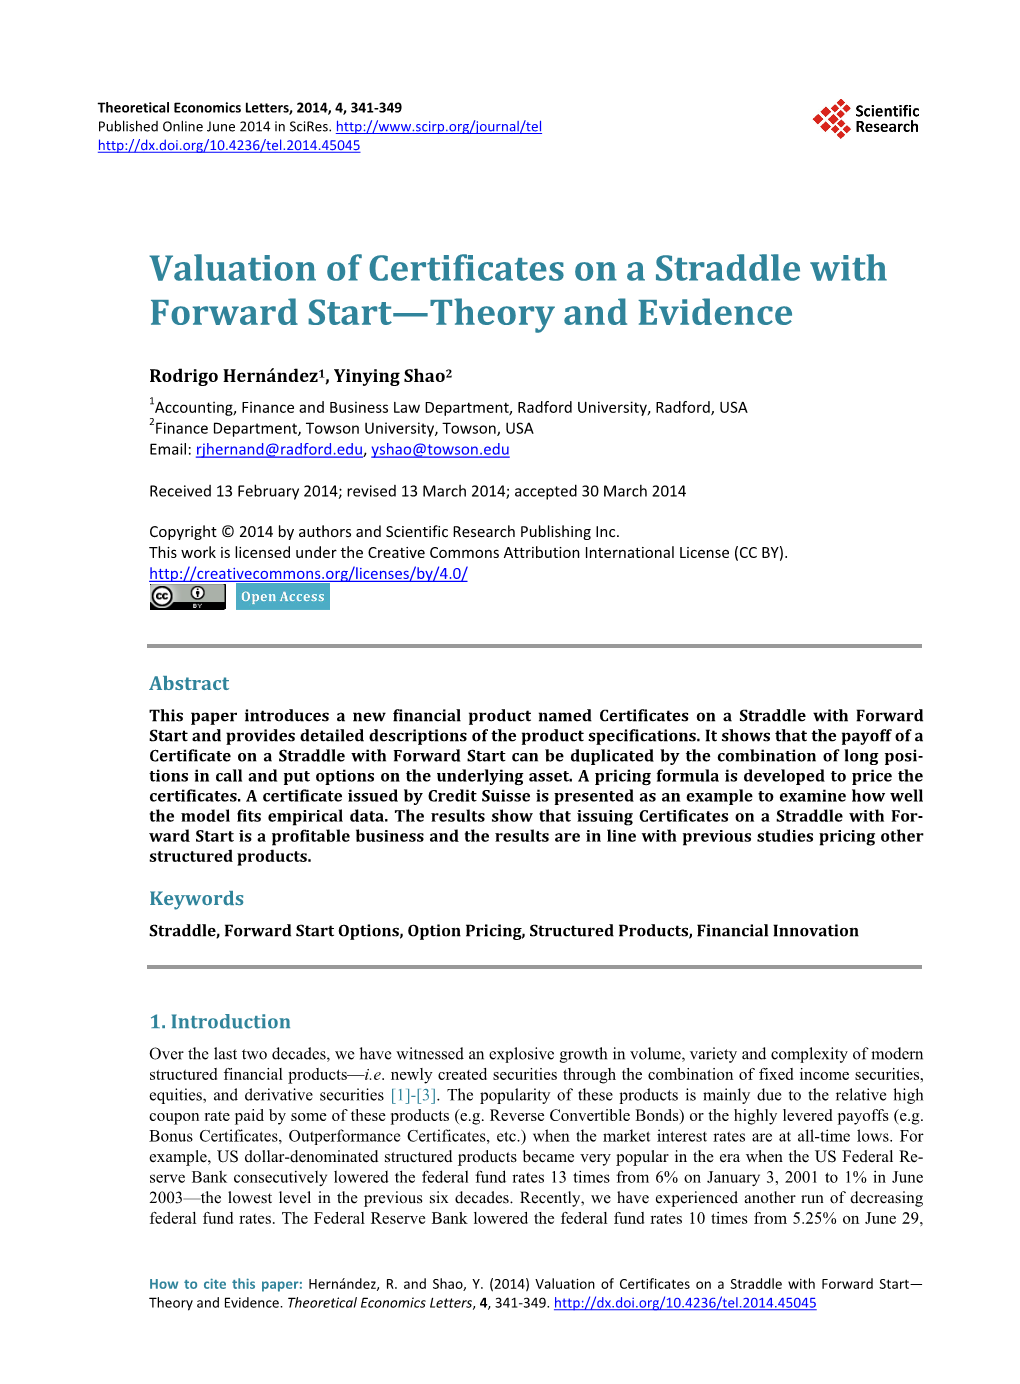 Valuation of Certificates on a Straddle with Forward Start—Theory and Evidence